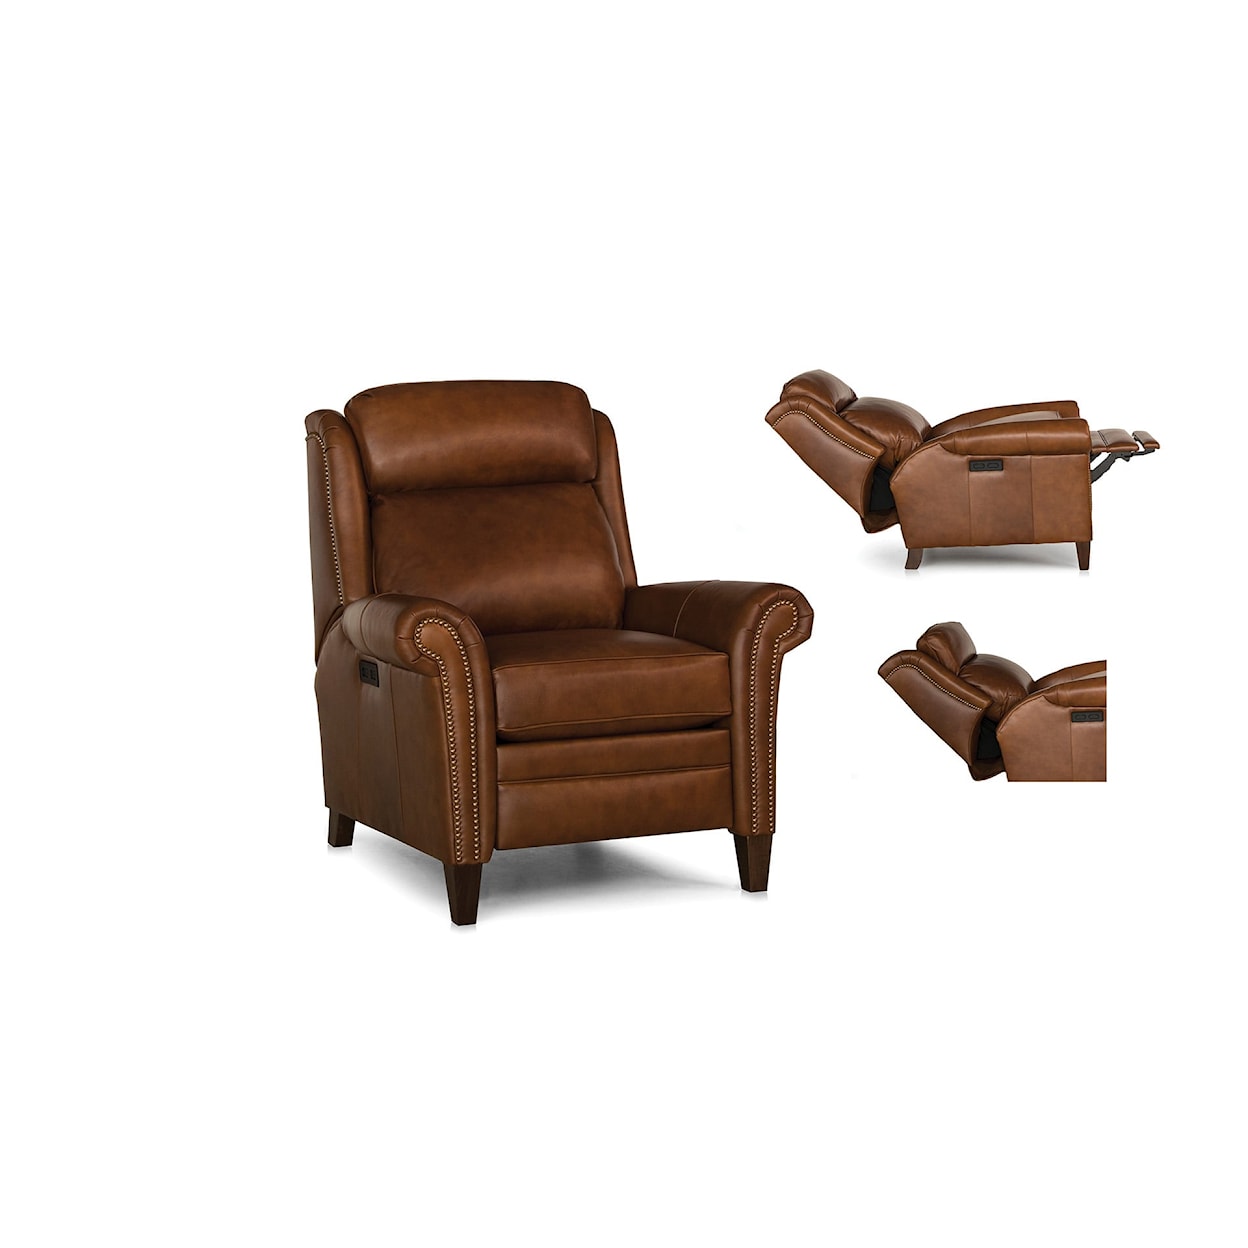 Smith Brothers 730 Motorized Recliner Chair